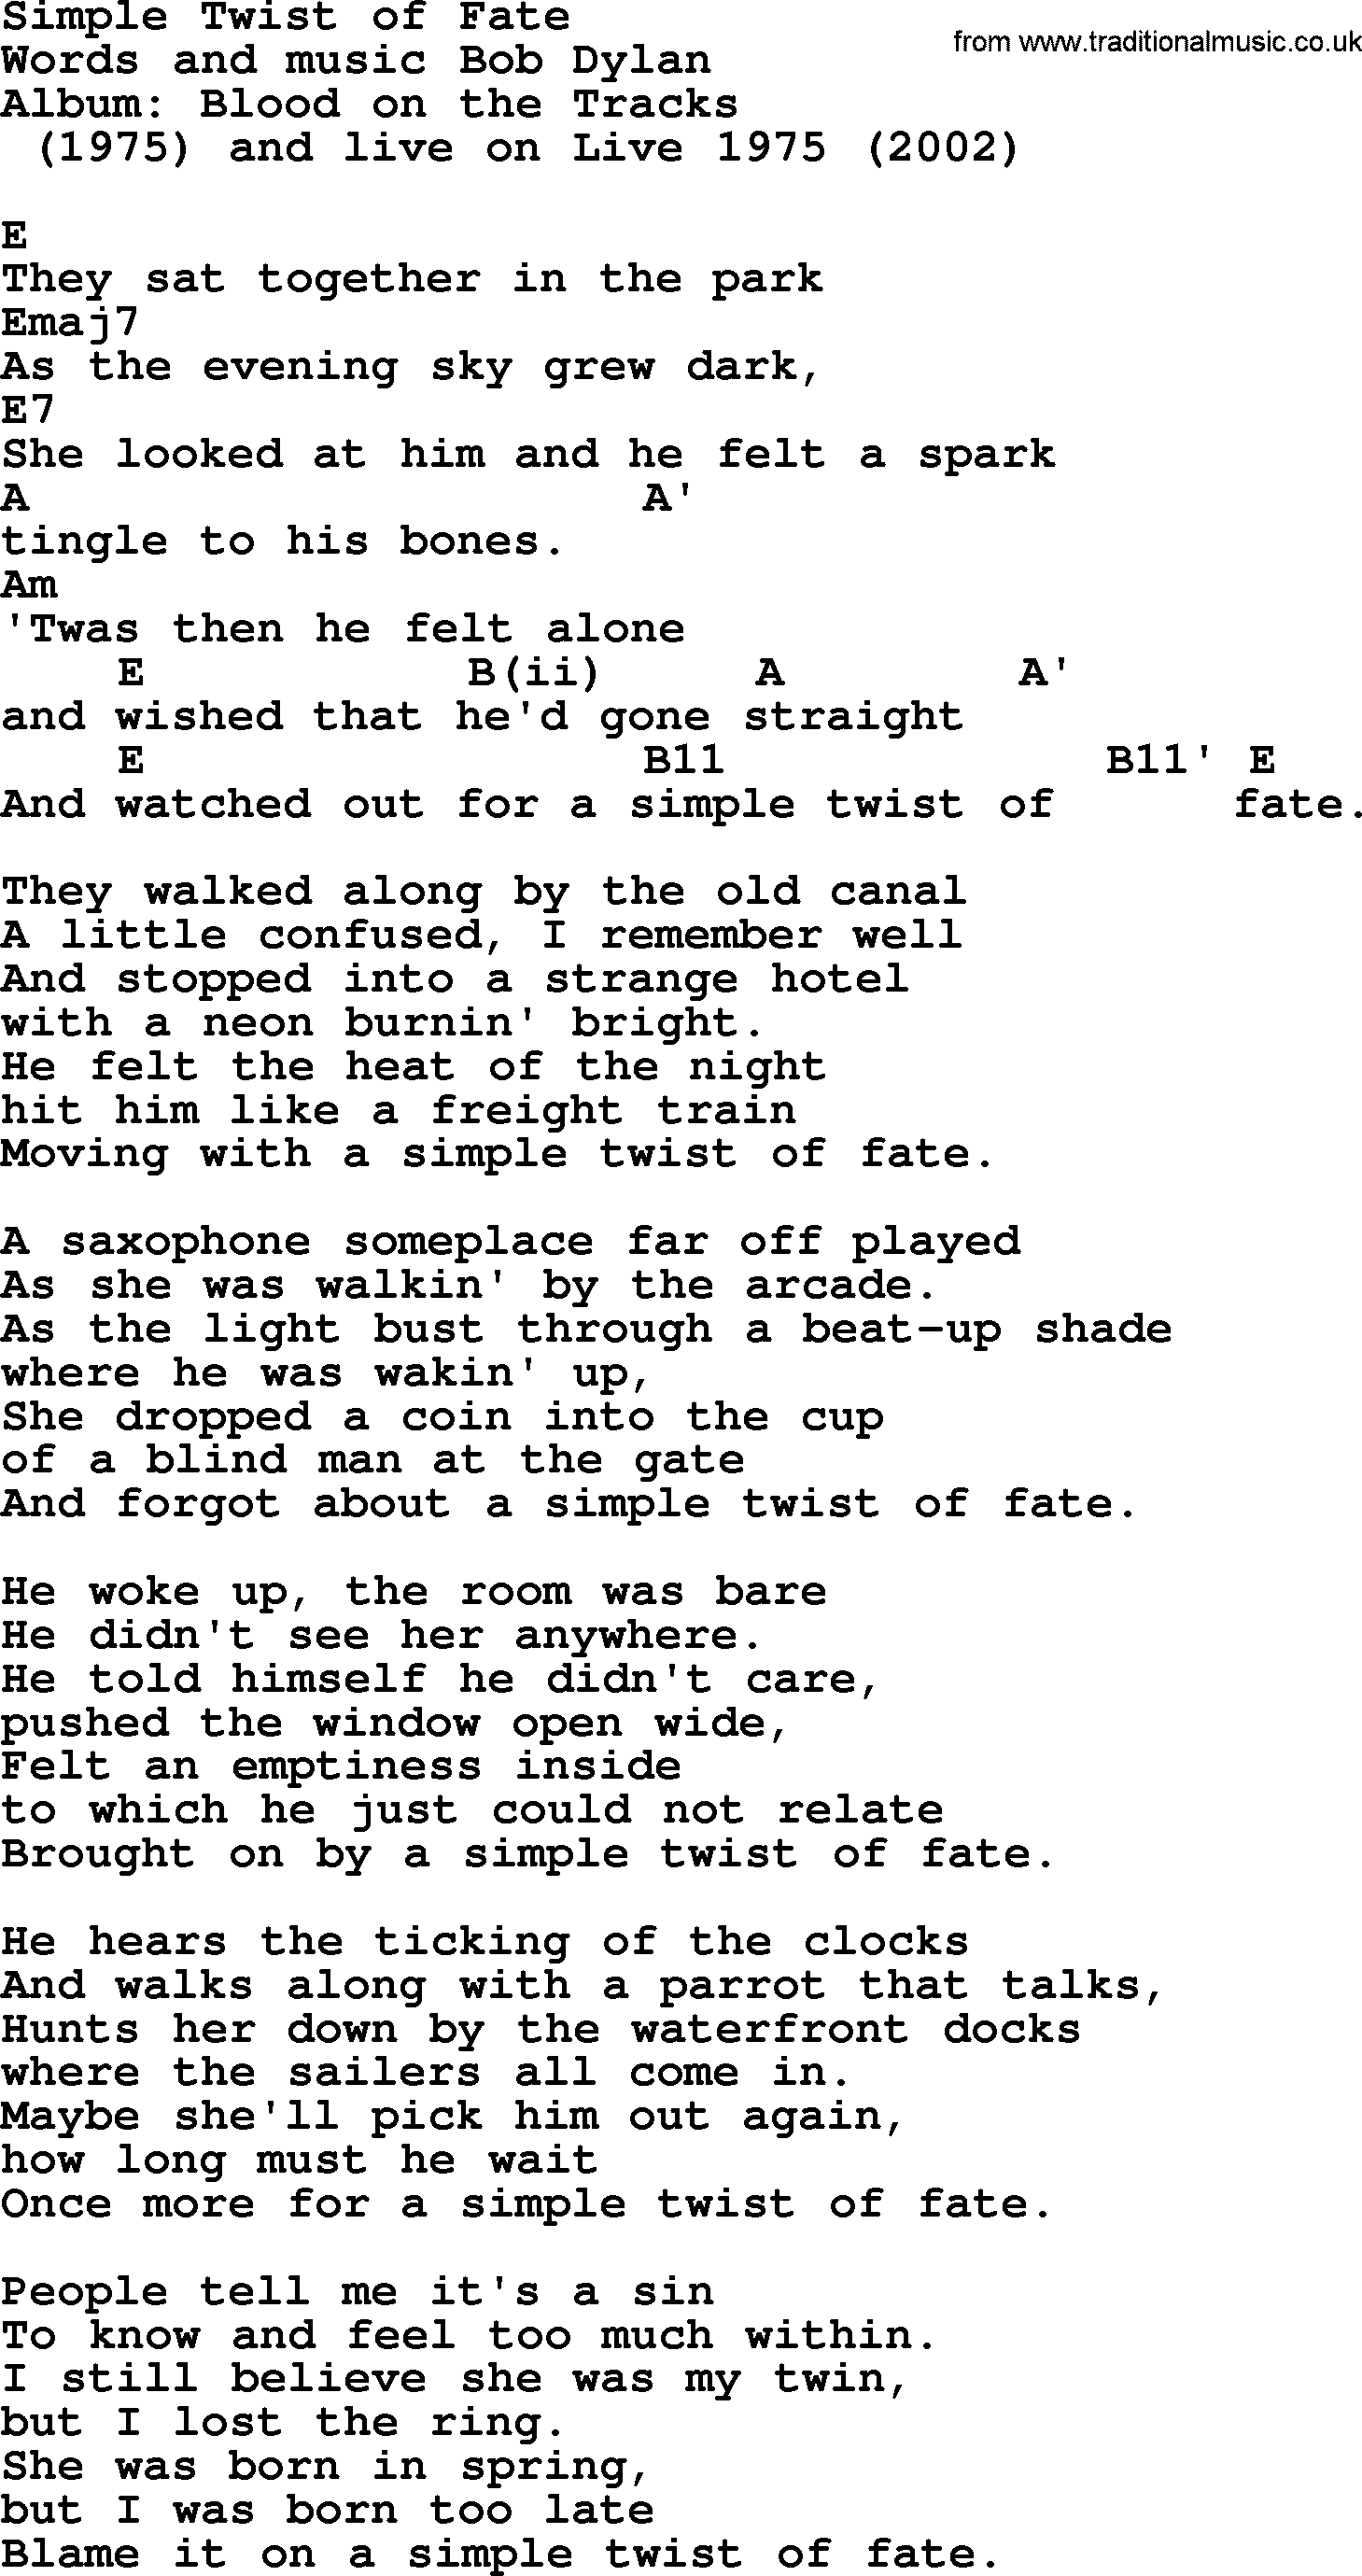 Bob Dylan song, lyrics with chords - Simple Twist of Fate